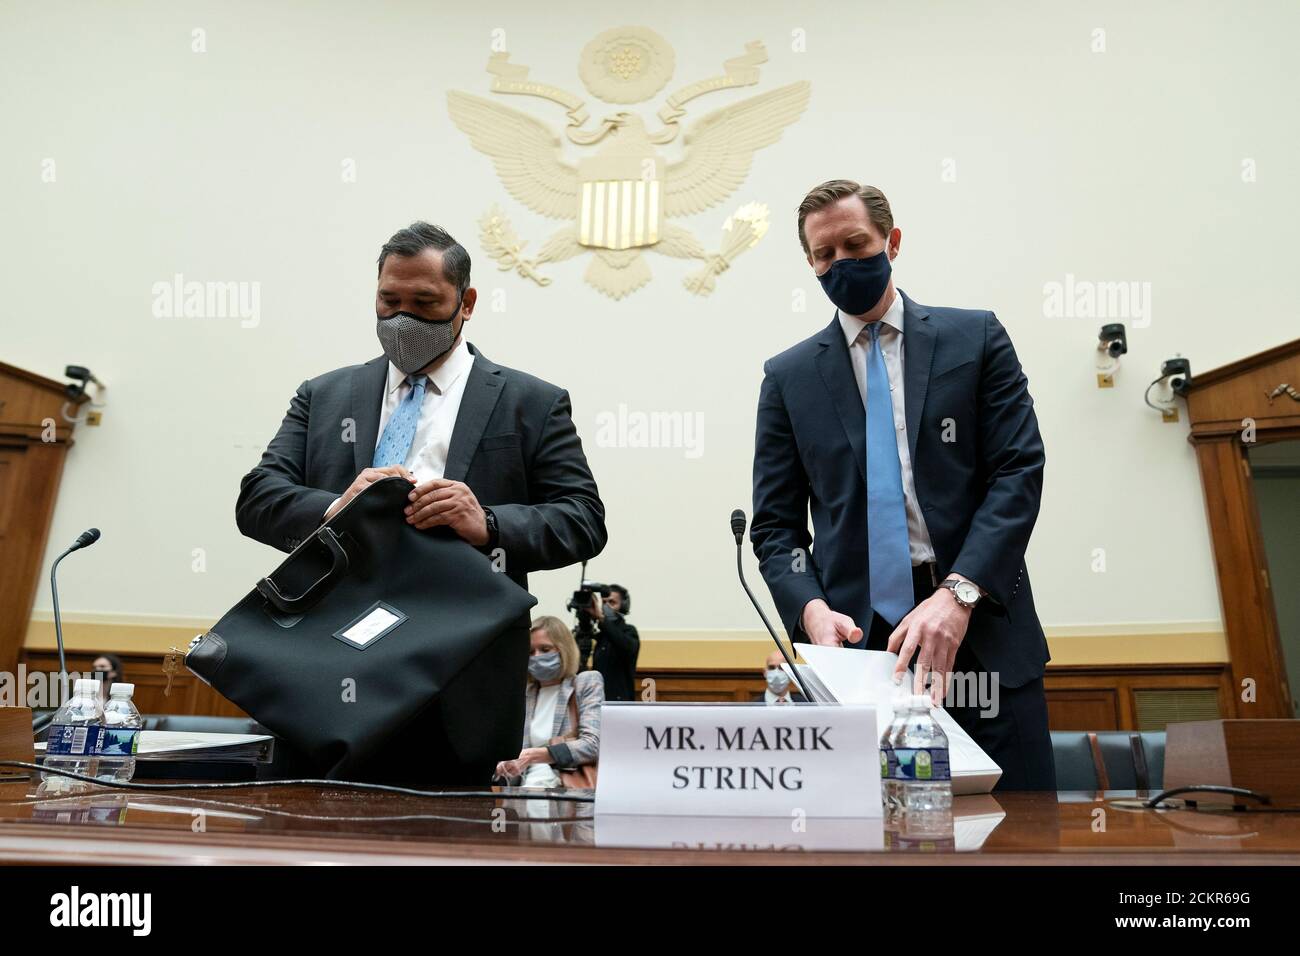 Brian Bulatao, under secretary of state for management at the US Department of State, left, and Marik String, acting legal adviser at the U.S. Department of State, arrive to a House Foreign Affairs Committee hearing in Washington, DC, U.S., on Wednesday, Sept. 16, 2020. The hearing is investigating the firing of State Department Inspector General Steve Linick. Credit: Stefani Reynolds/Pool via CNP /MediaPunch Stock Photo